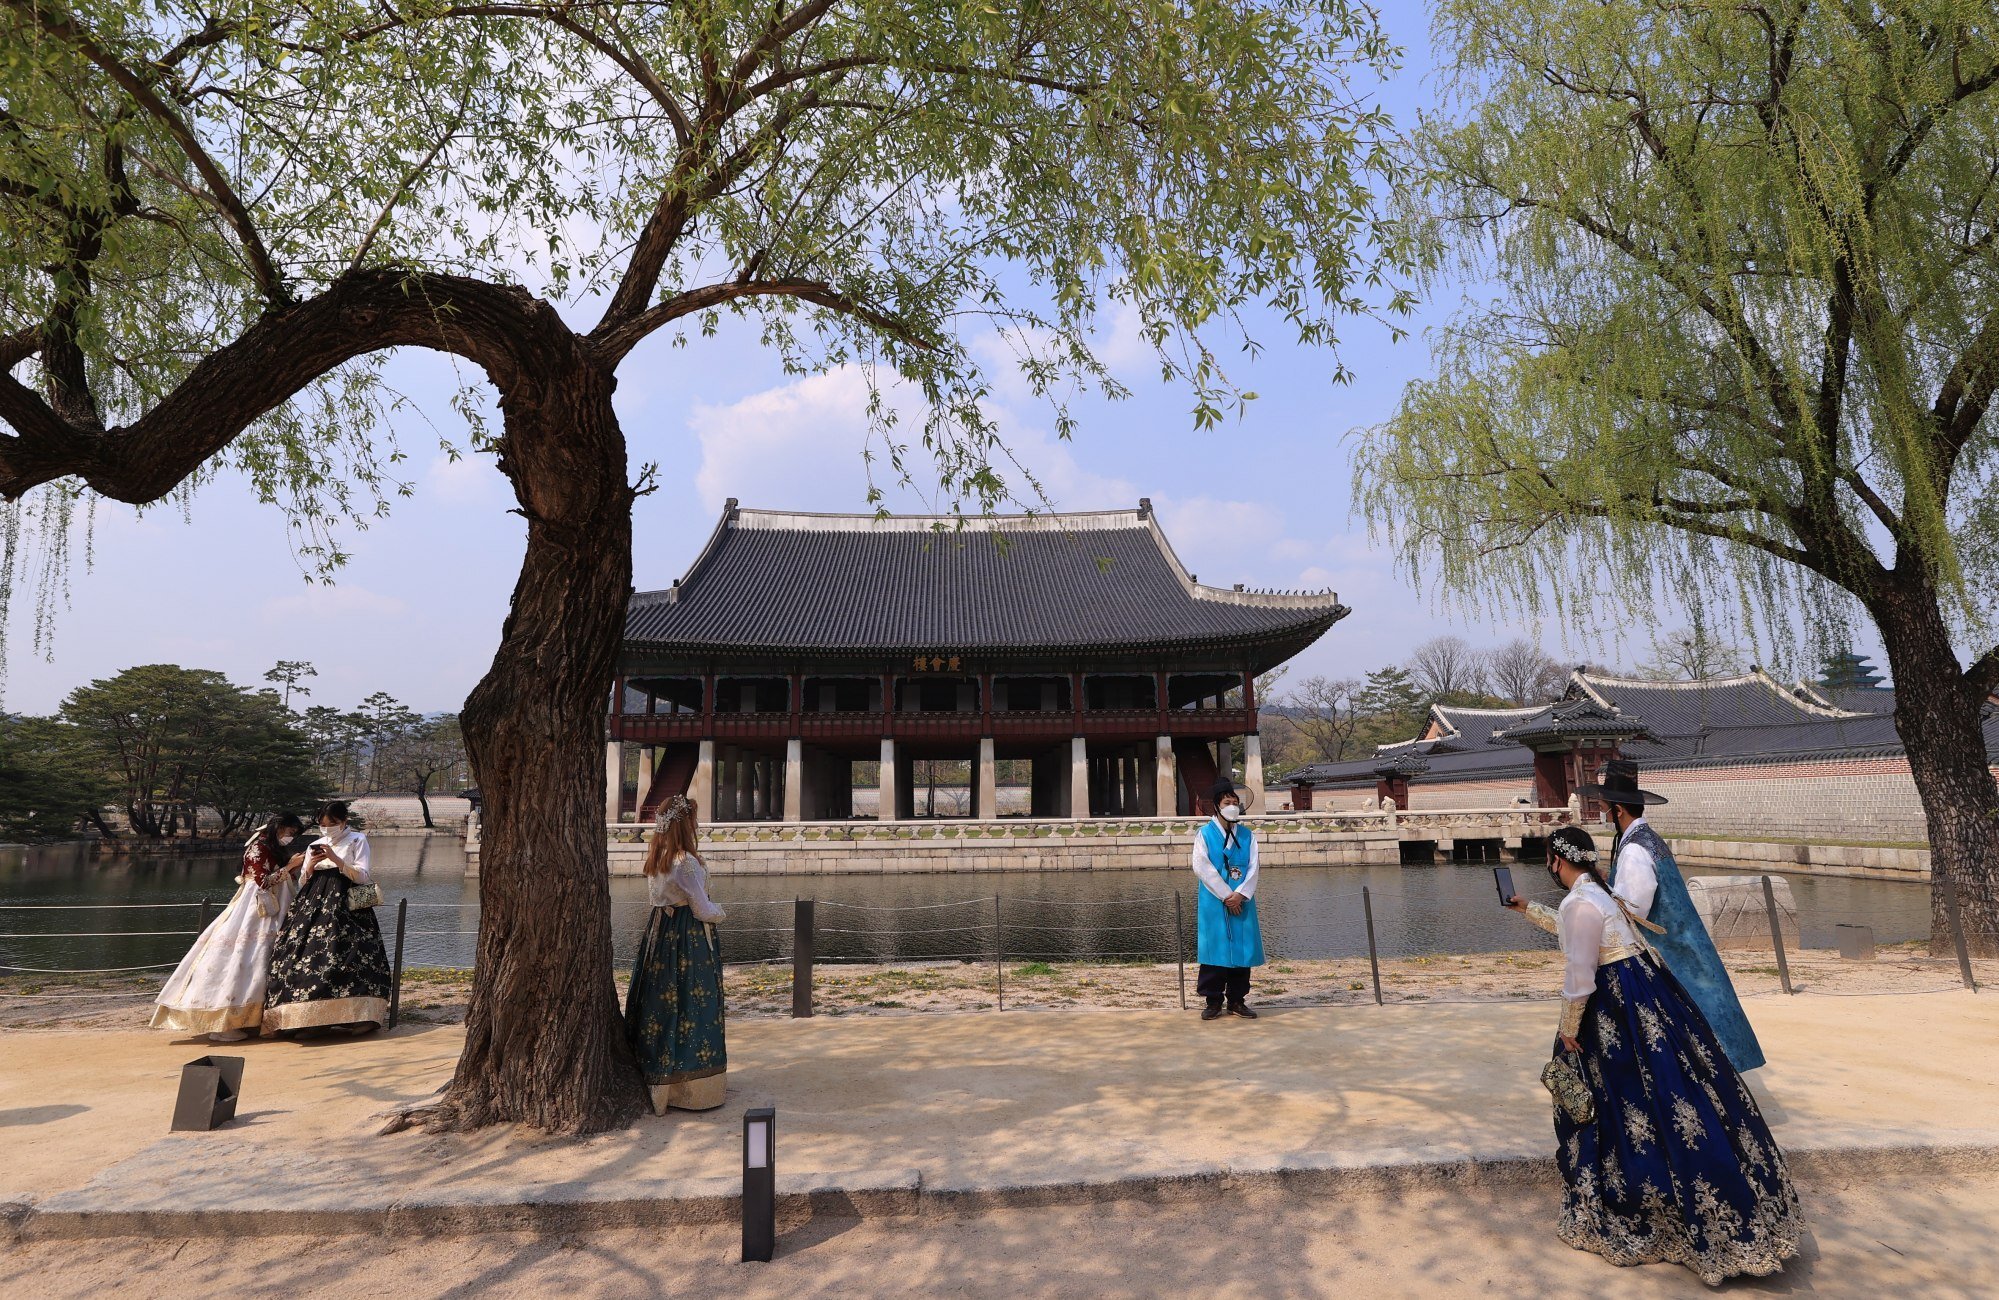 South Koreans in traditional hanbok attire visit Gyeongbok Palace in central Seoul. Photo: EPA-EFE